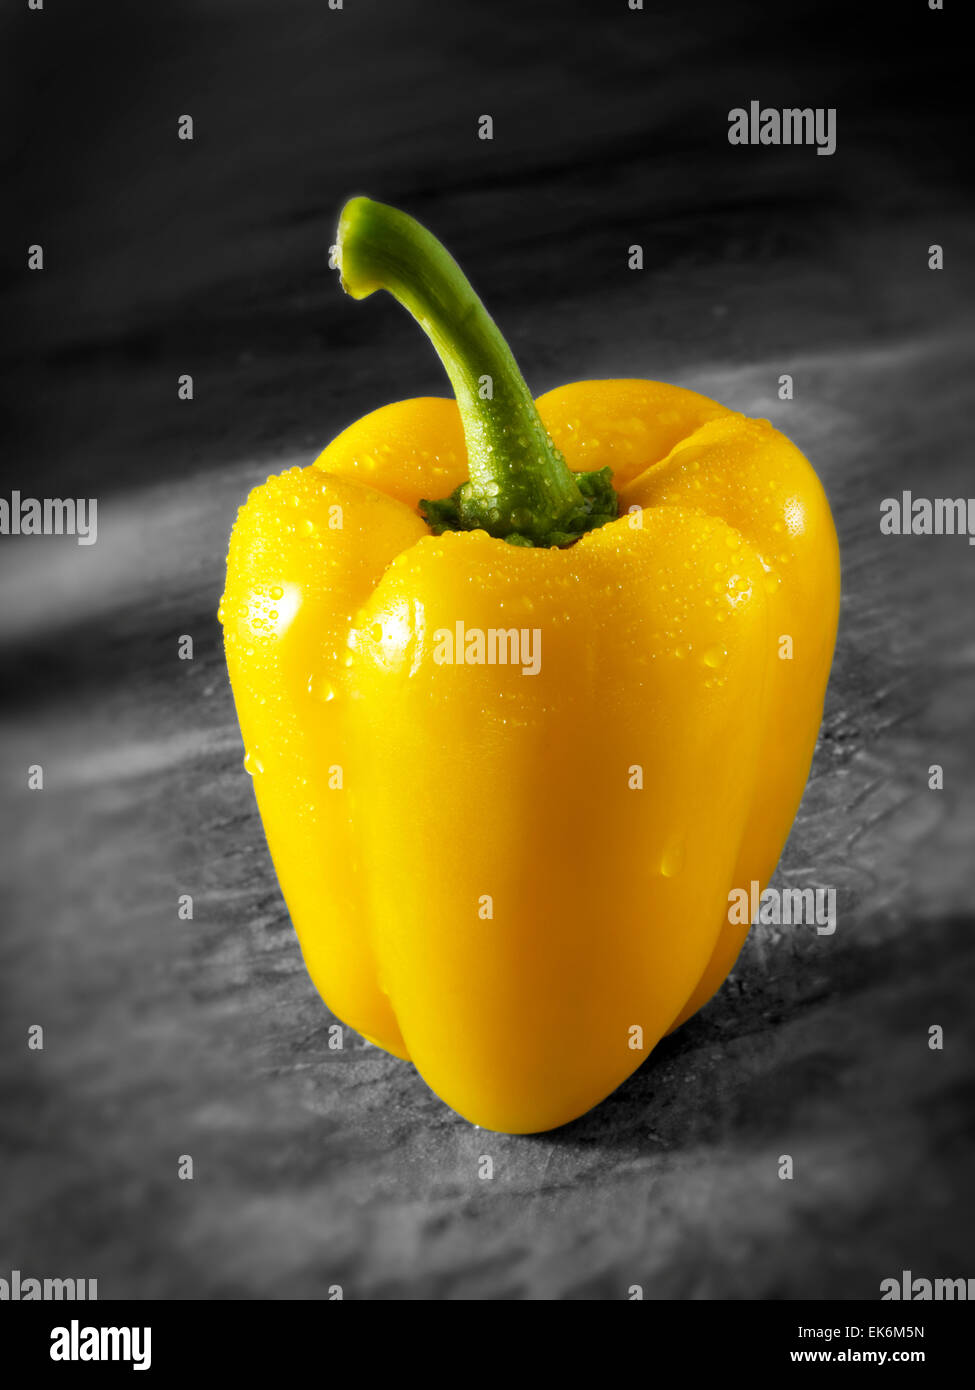 Close up of a whole fresh yellow bell pepper ( capsicum ) Stock Photo